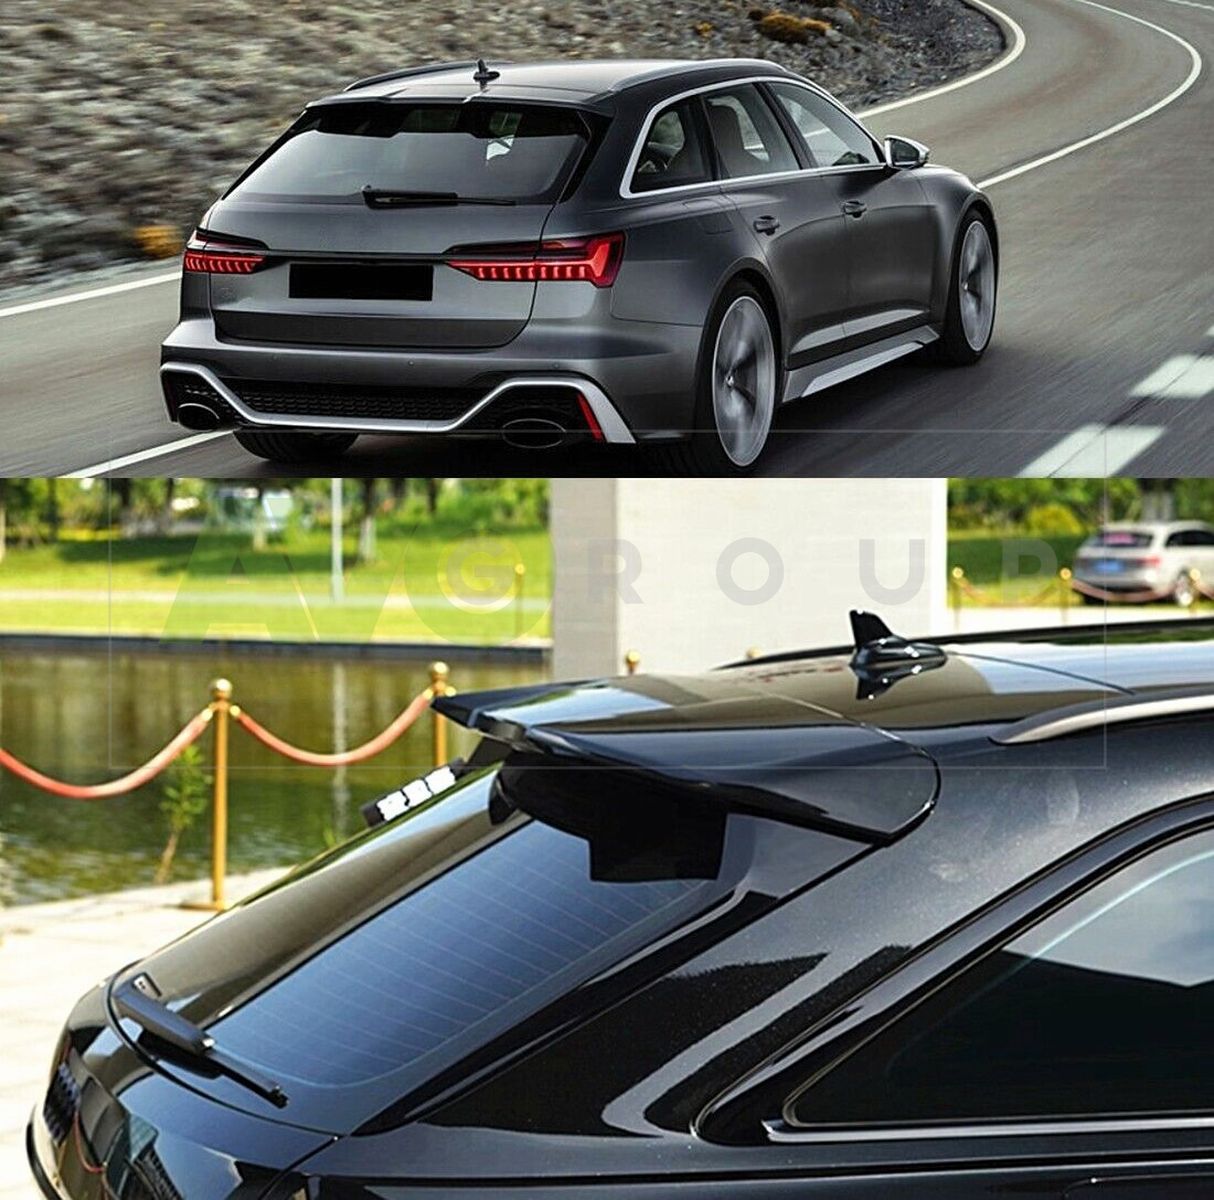 RS style rear trunk roof spoiler for Audi A6 C8 S6 Avant ALLROAD Black gloss